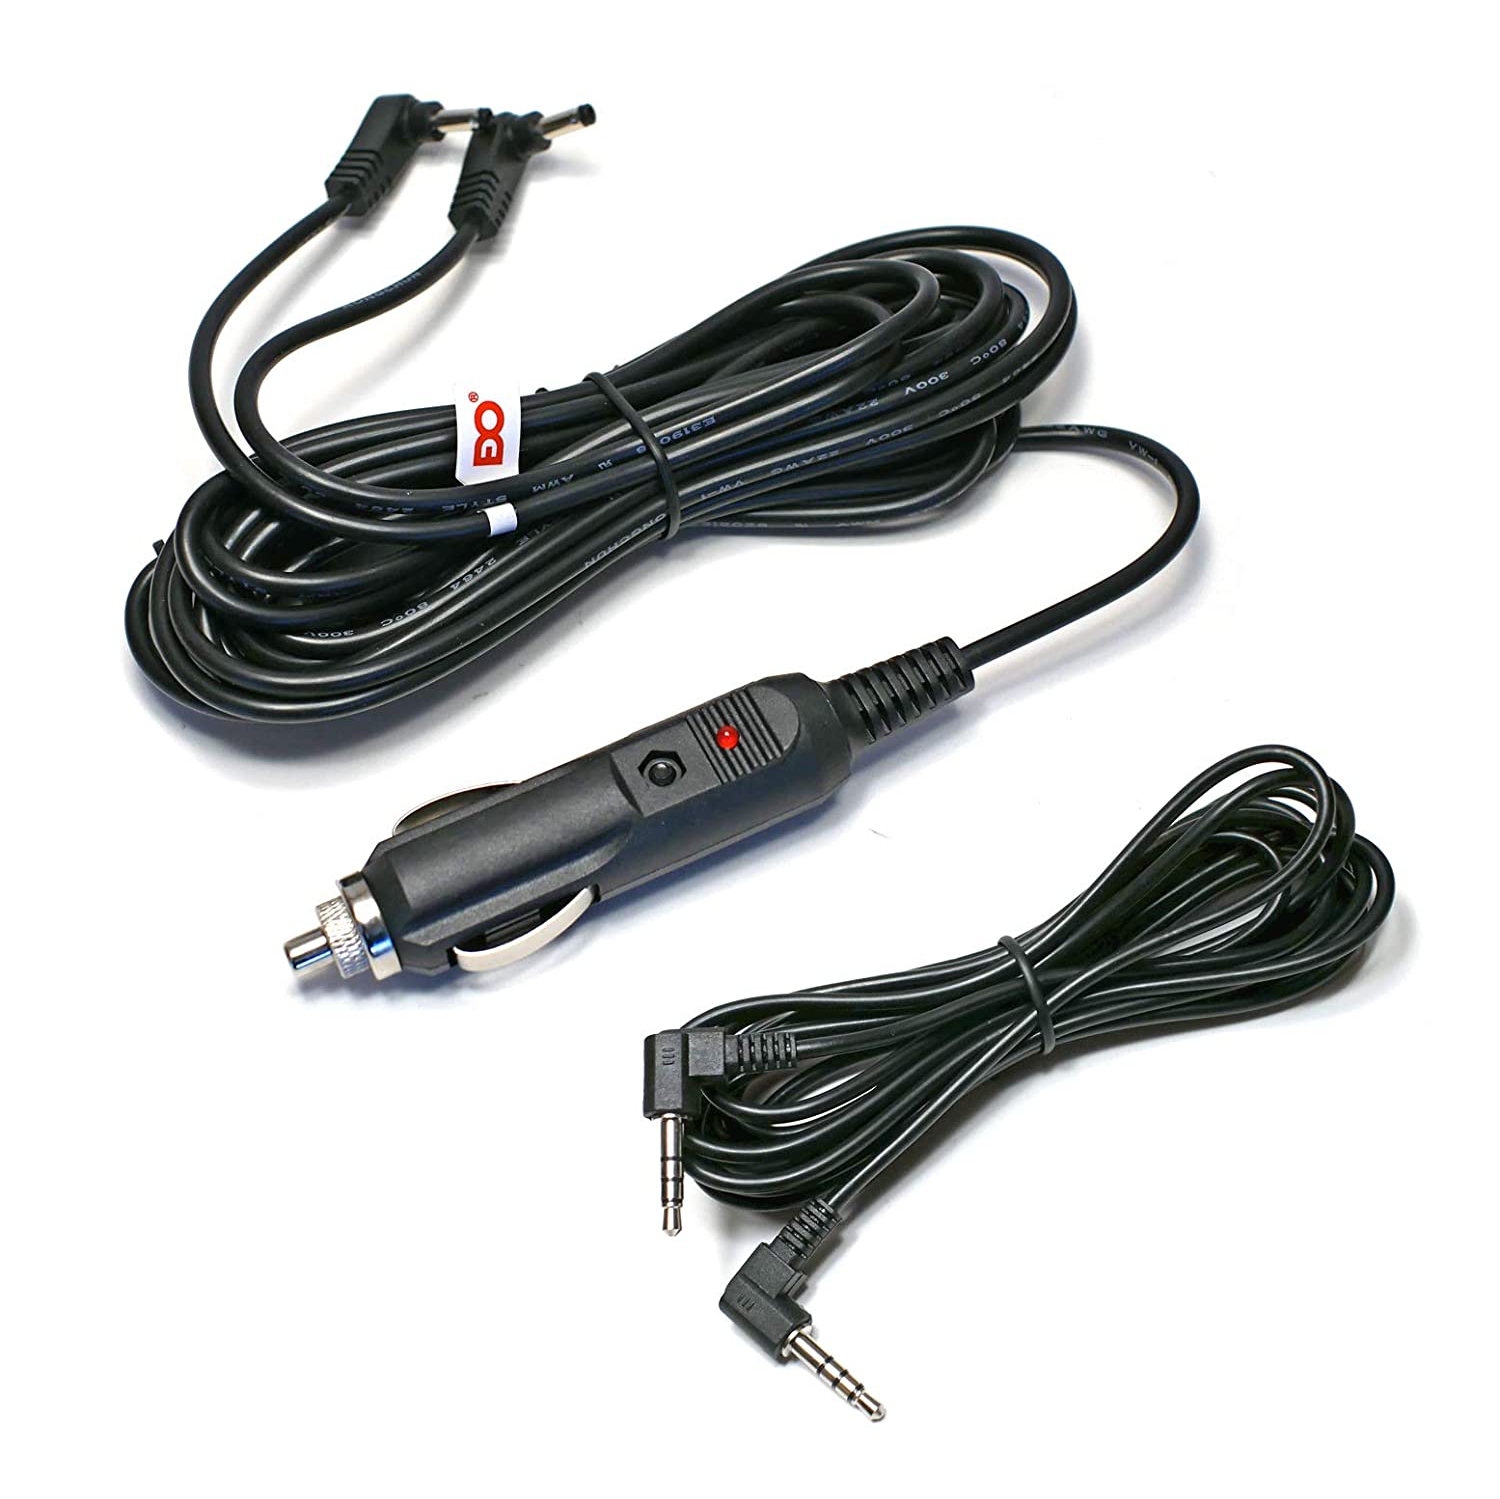 EDO Tech 11 Ft Car Charger Adapter Power Cord & 10 Ft Audio Video Av Cable for Philips Dual Screen Portable DVD player